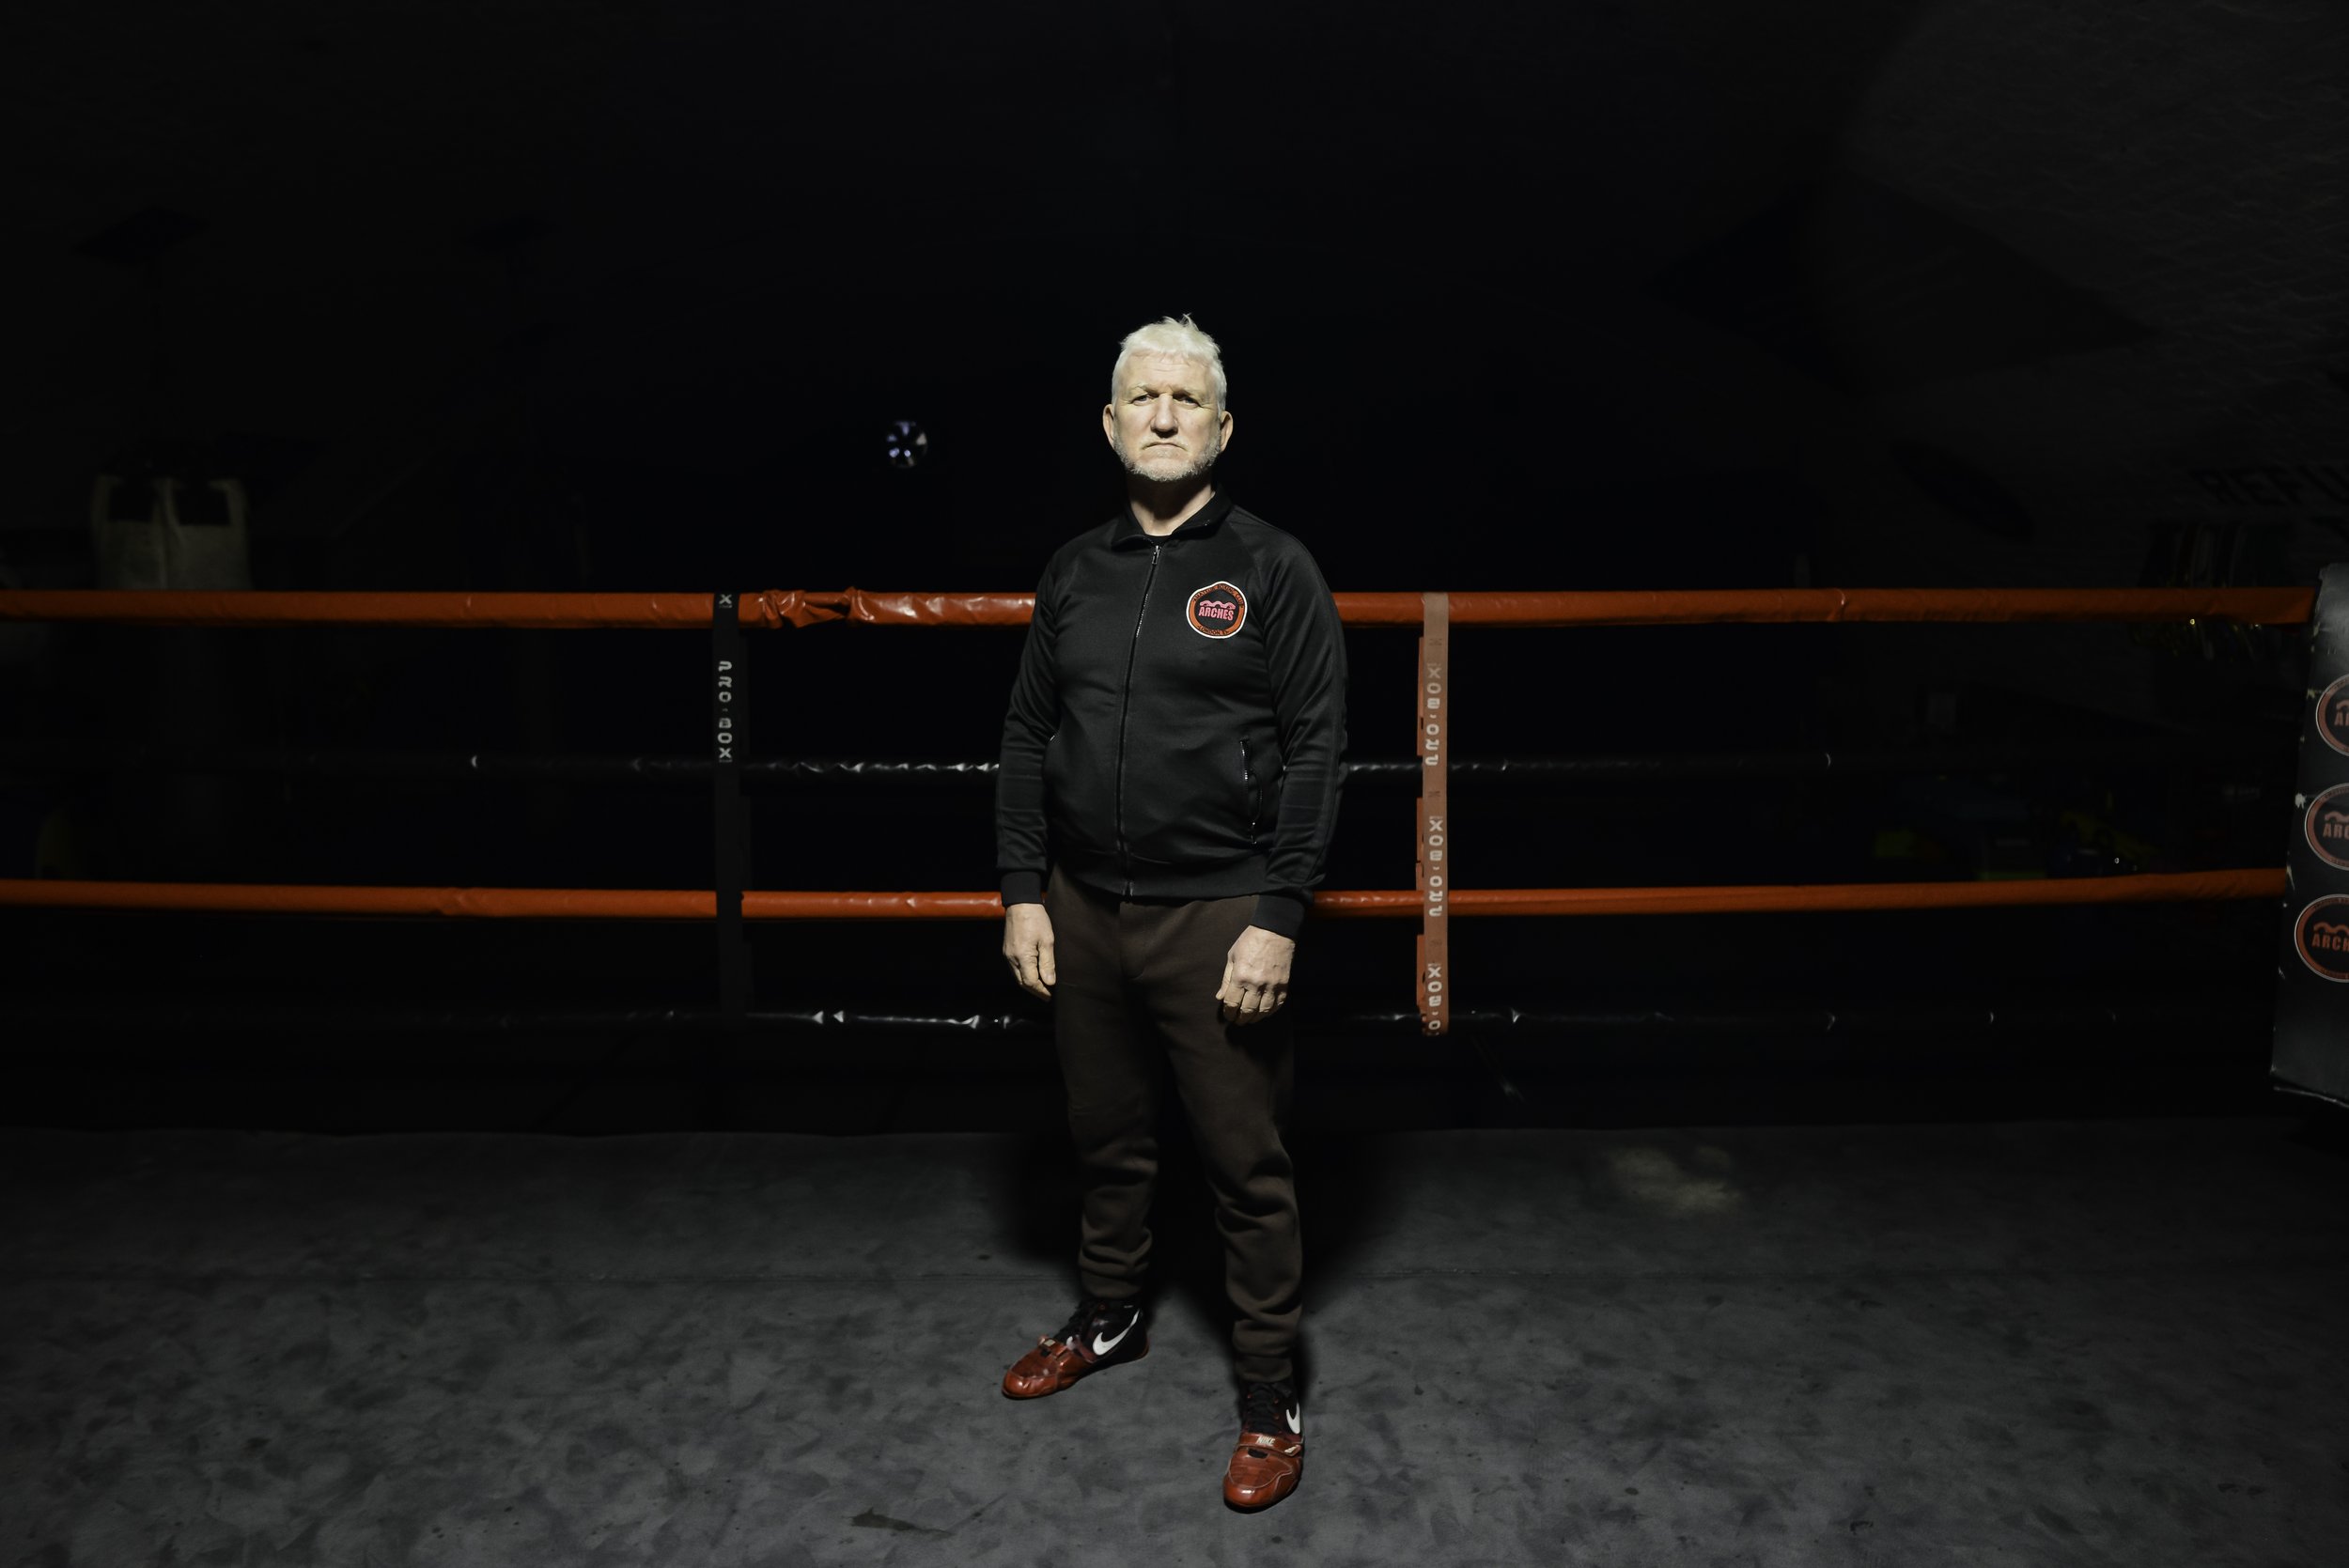  Capturing Master Bill Judd, the founder of KO Academy in Bethnal Green, the 3 schools under the arches he created, dating back to the 70s.  A hugely accomplished martial artist, teacher and former world champion - Bill is an incredibly humble and kn